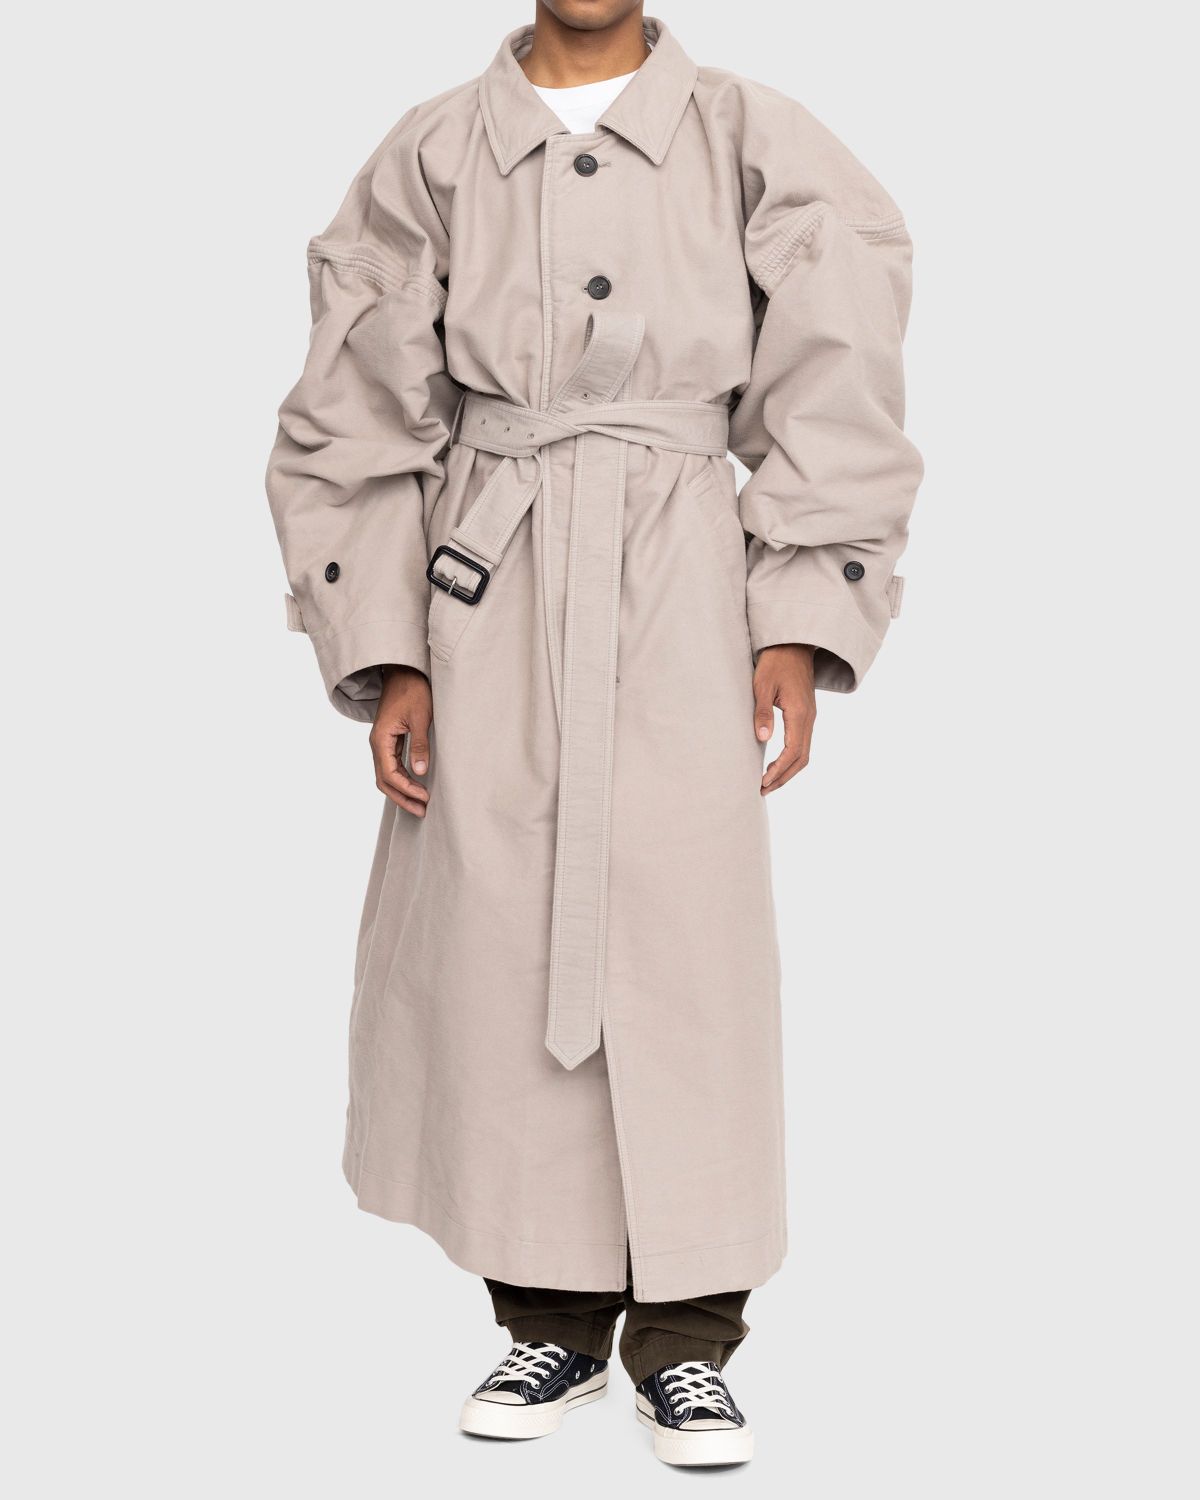 Y/Project – Wire Maxi Trench Coat Brown - Trench Coats - Brown - Image 2